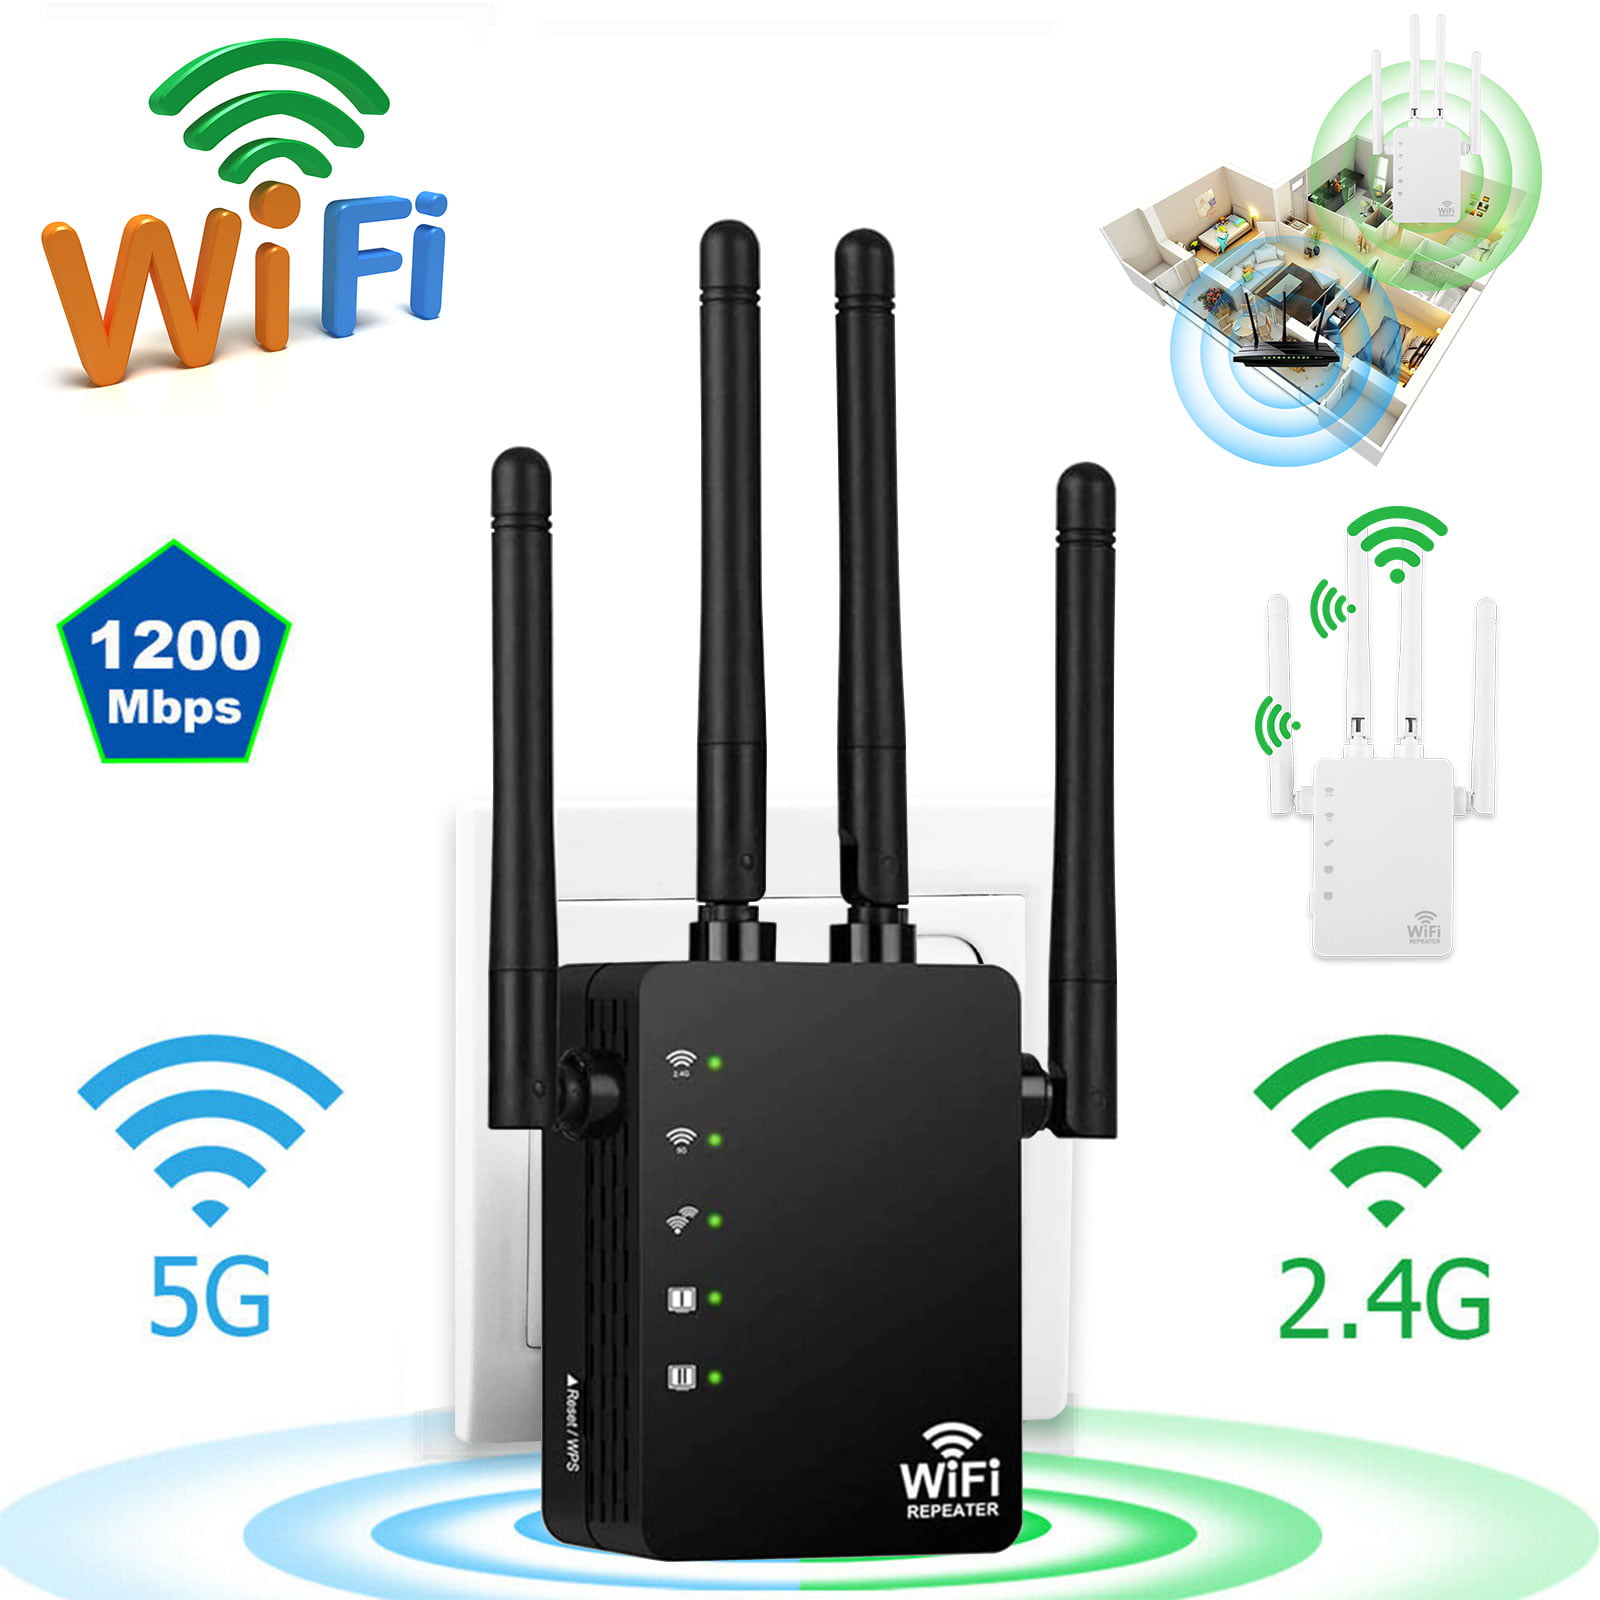 Extend WiFi Signal to Smart Home & Alexa Devices 1200Mbps Wireless Signal Booster WiFi Extender 4 Antennas Covers Up to 2500Sq.ft and 25 Devices 2 Ethernet Port